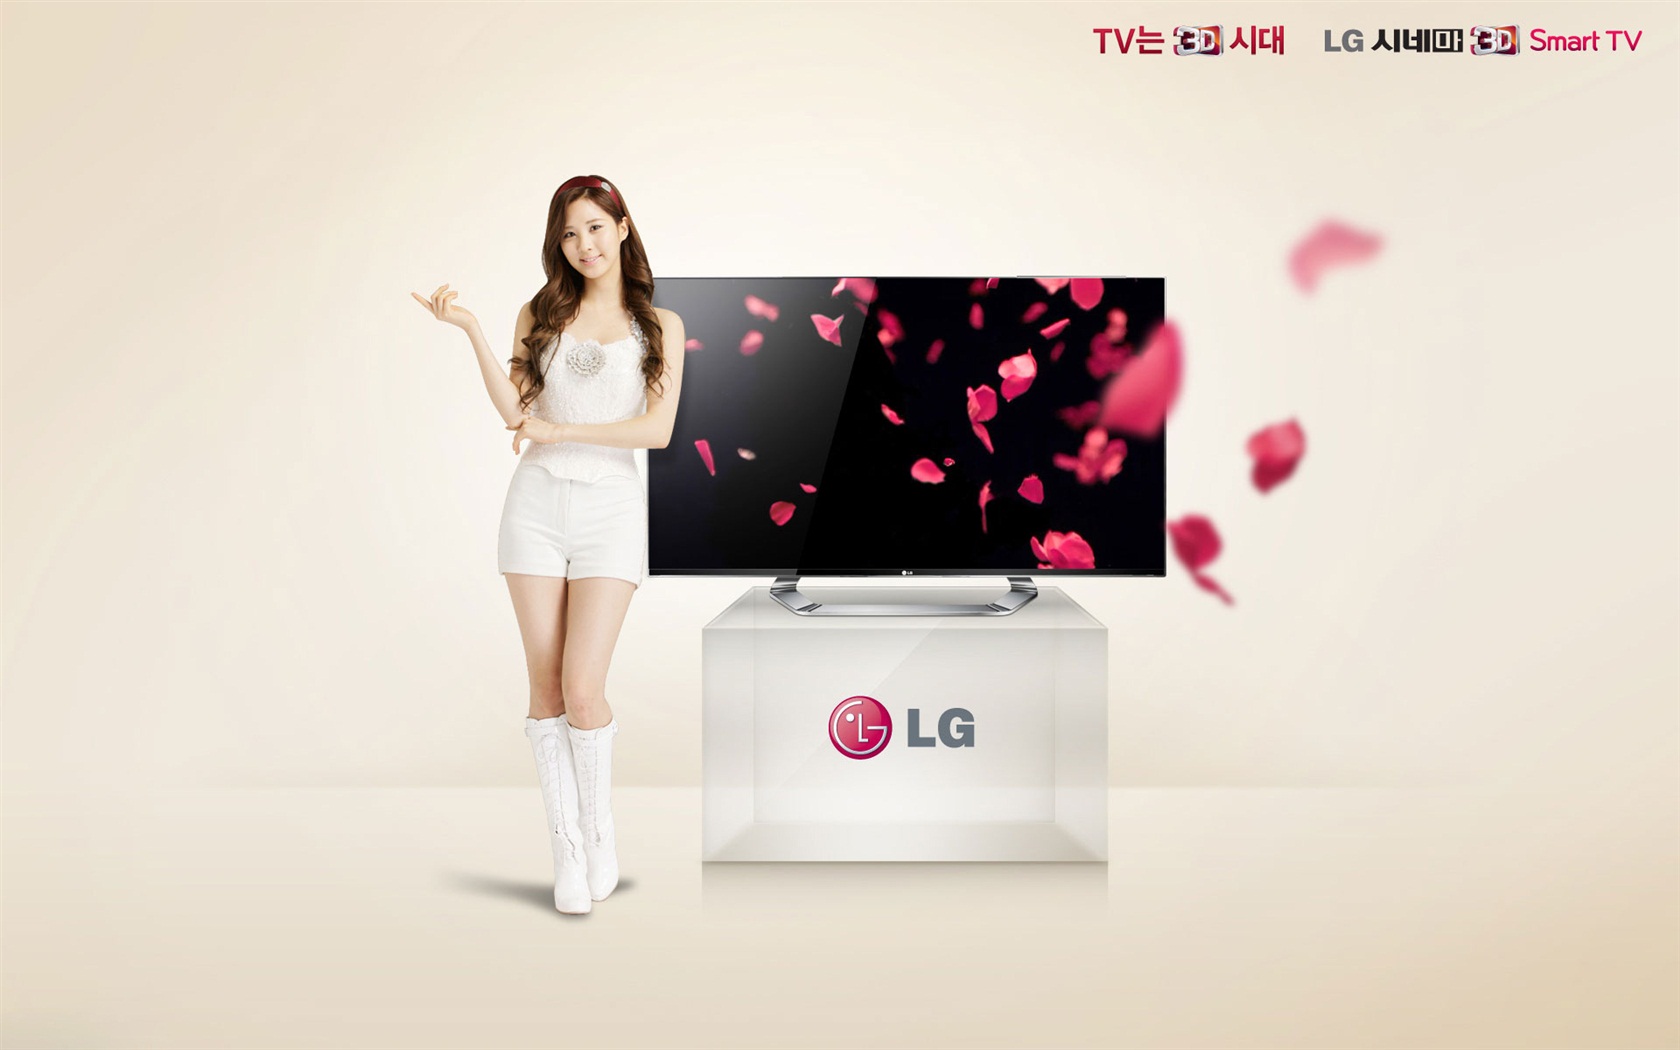 Girls Generation ACE and LG endorsements ads HD wallpapers #16 - 1680x1050